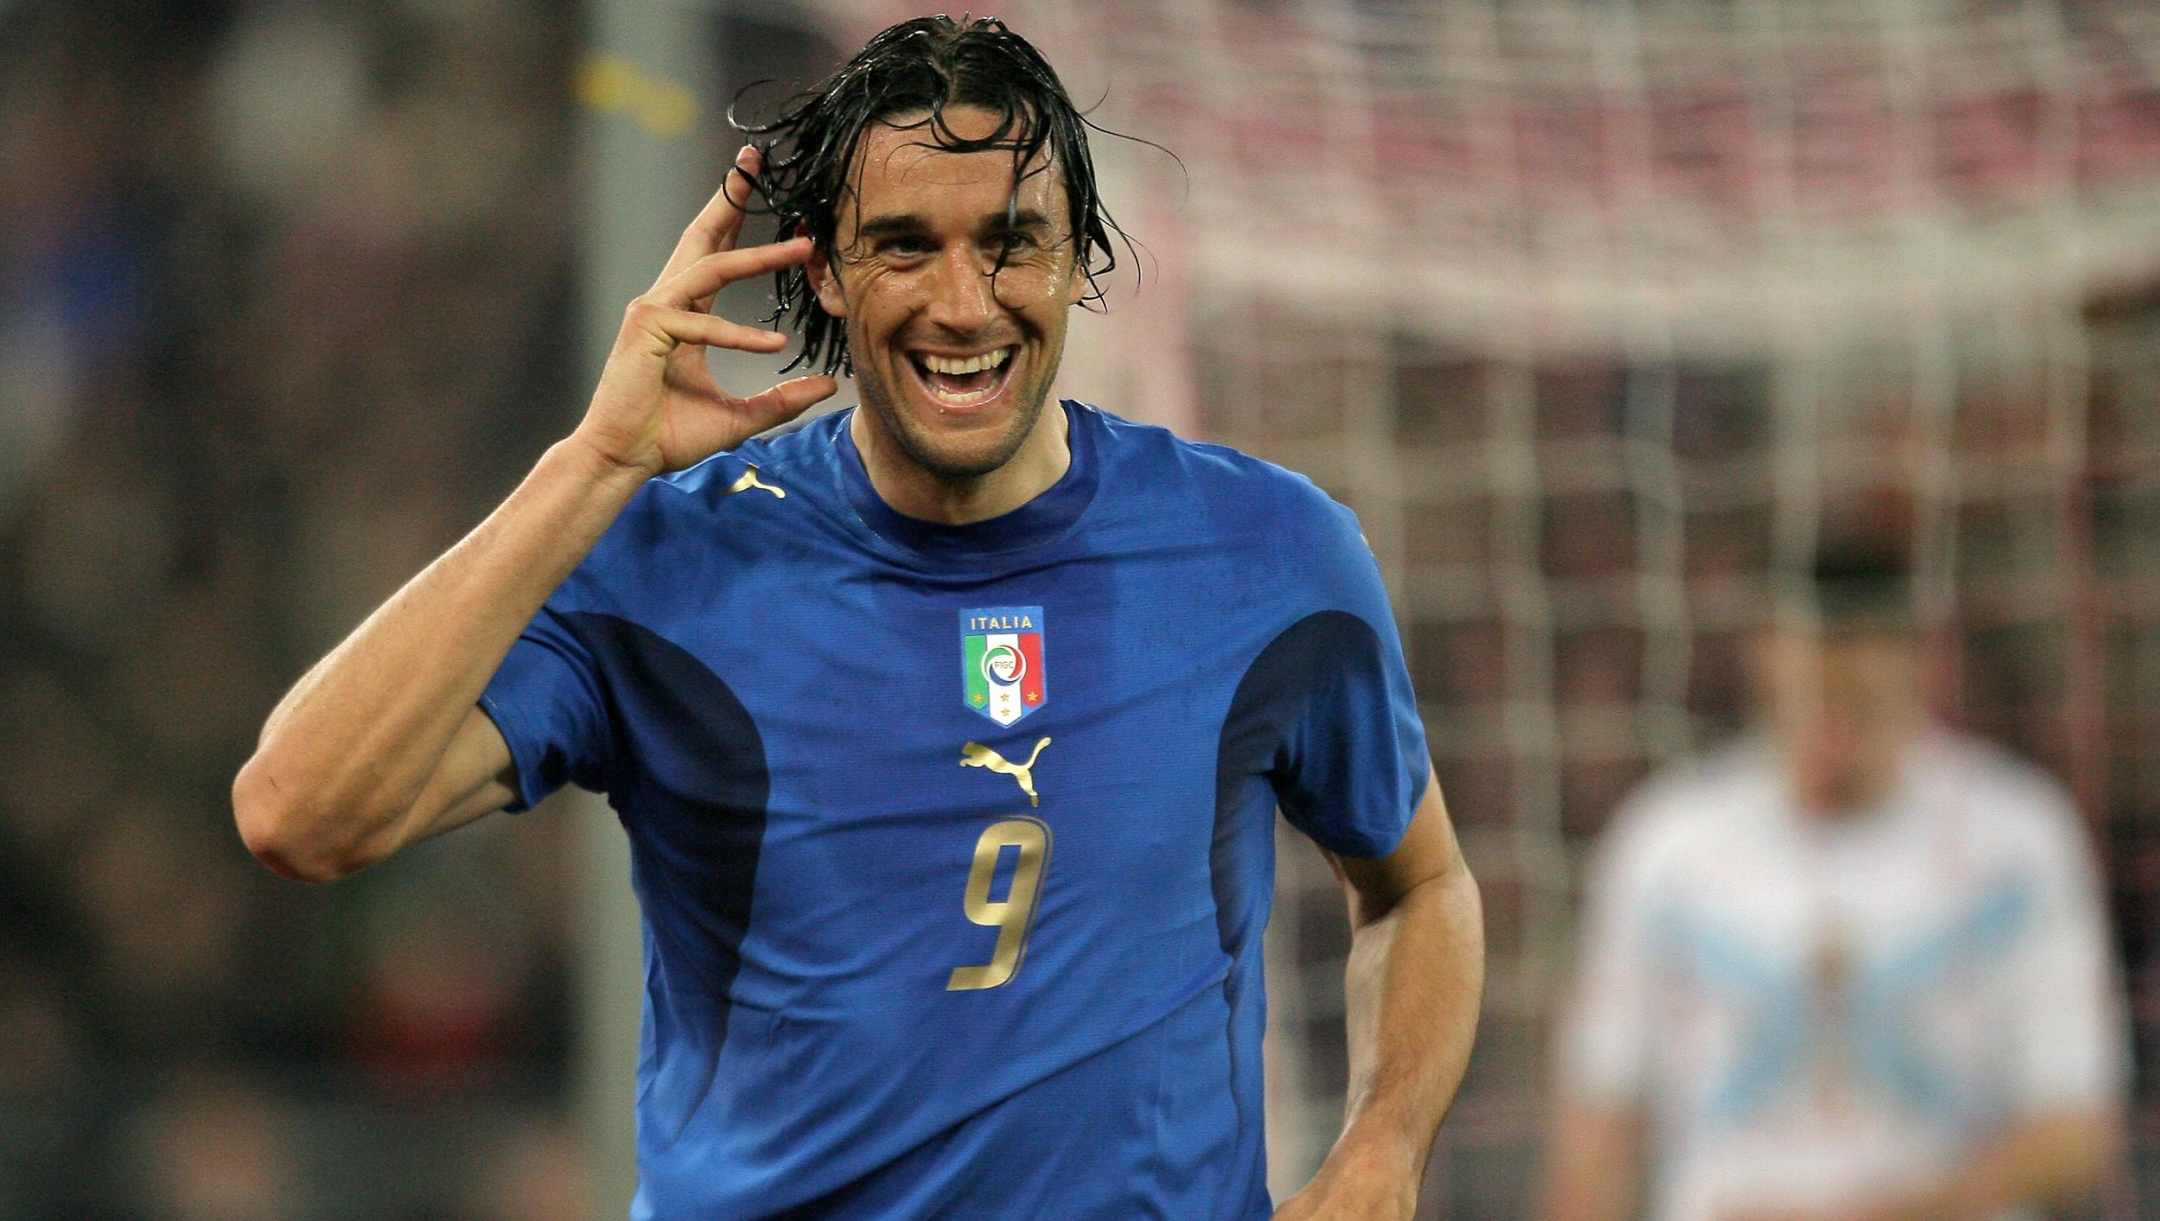 Italy's Luca Toni jubilates after scoring his second goal against Scotland during their Euro2008 Group B qualifying football match in Bari's San Nicola Stadium 28 March 2007. AFP PHOTO / FILIPPO MONTEFORTE (Photo by FILIPPO MONTEFORTE / AFP)